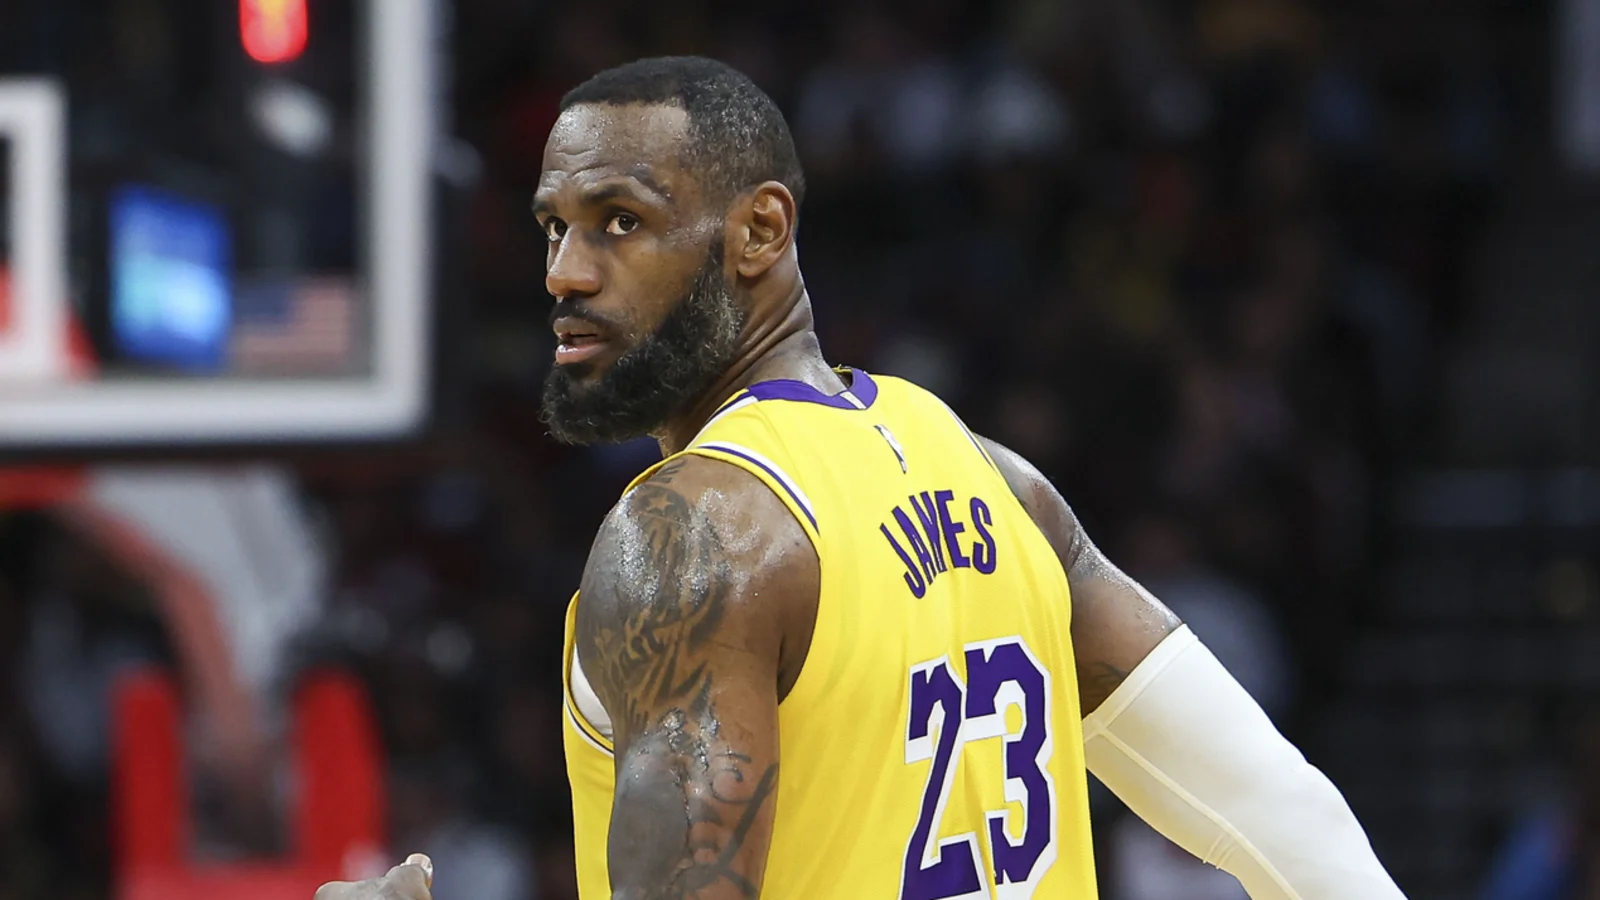 LeBron James signs 2-year $104 million deal with Lakers